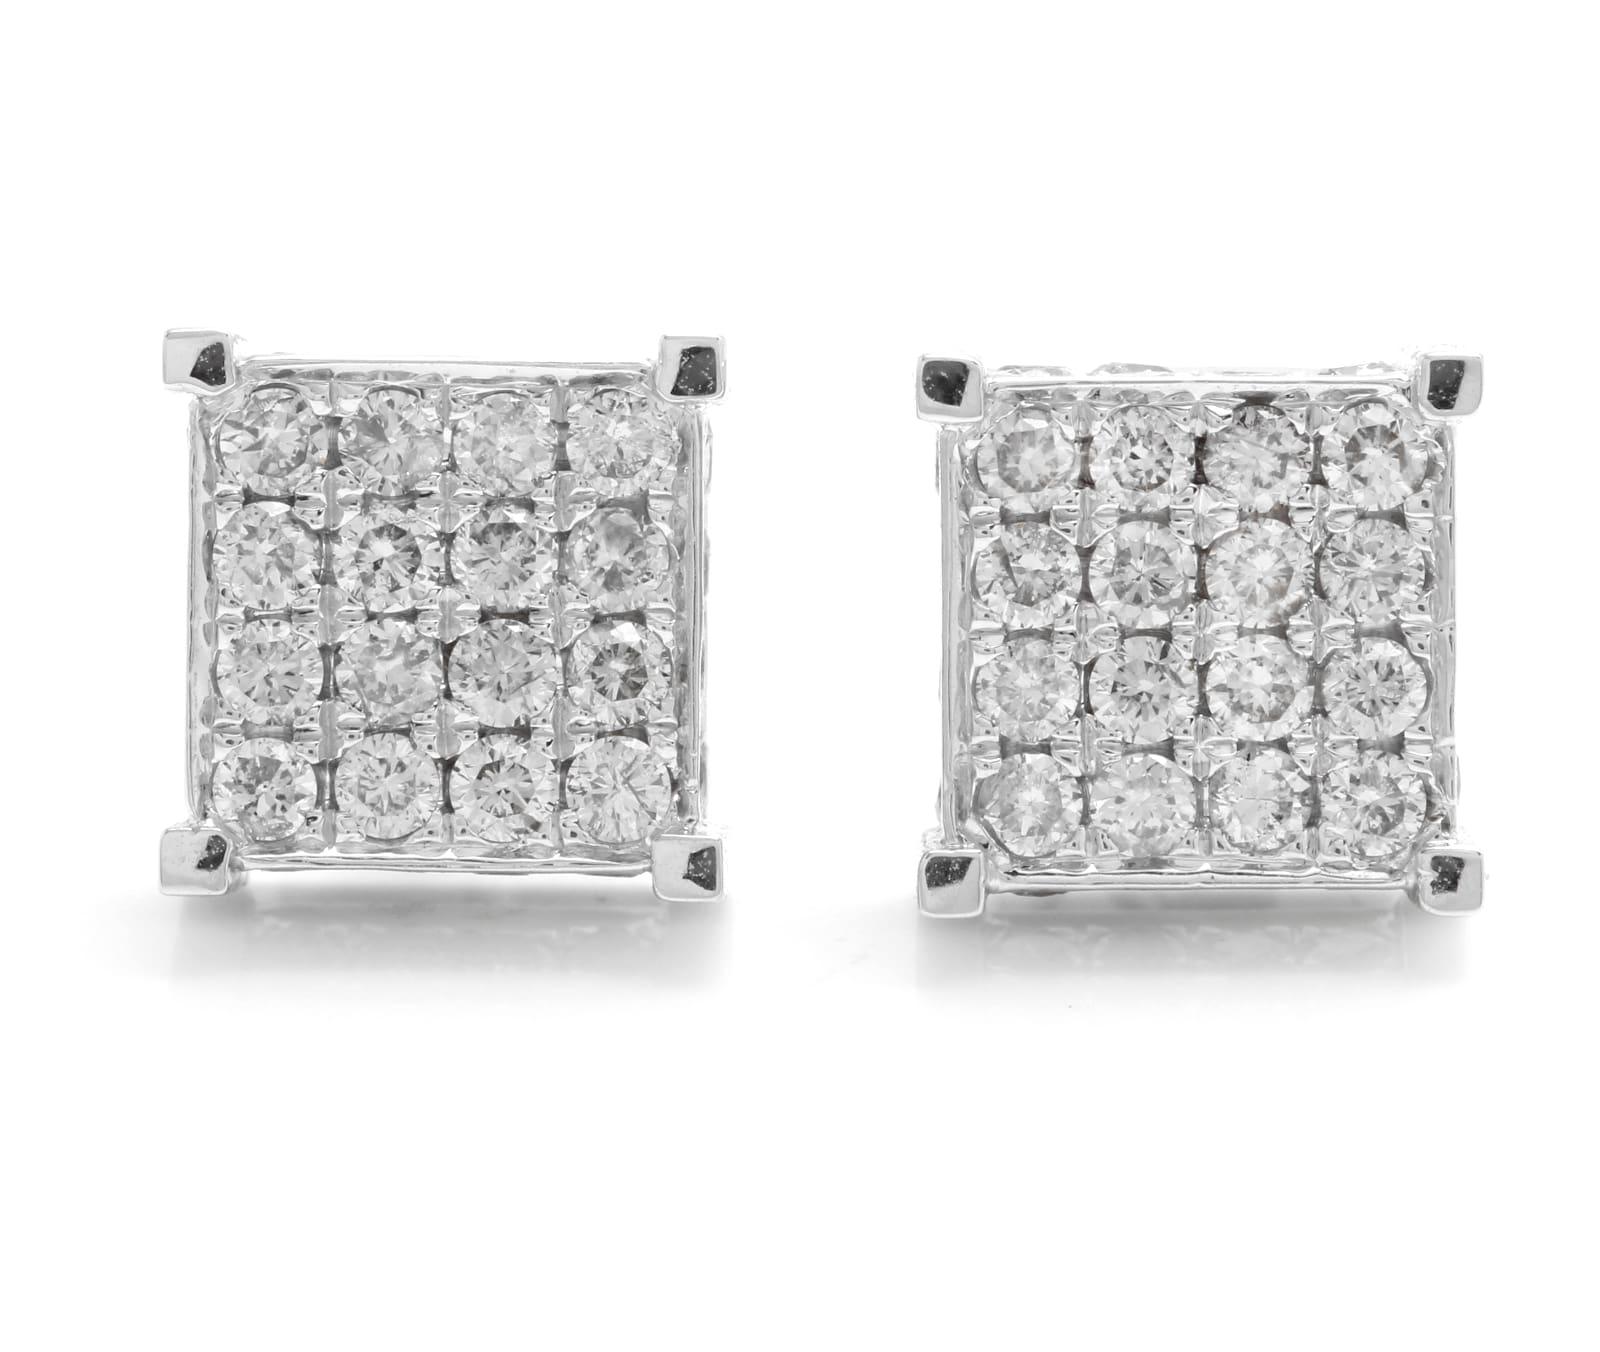 Exquisite 1.40 Carats Natural Diamond 14K Solid White Gold Stud Earrings

Amazing looking piece!

Total Natural Round Cut Diamonds Weight: 1.40 Carats (both earrings) SI1-SI2 / G-H

Total Earrings Weight is: 3.7 grams

Disclaimer: all weights,